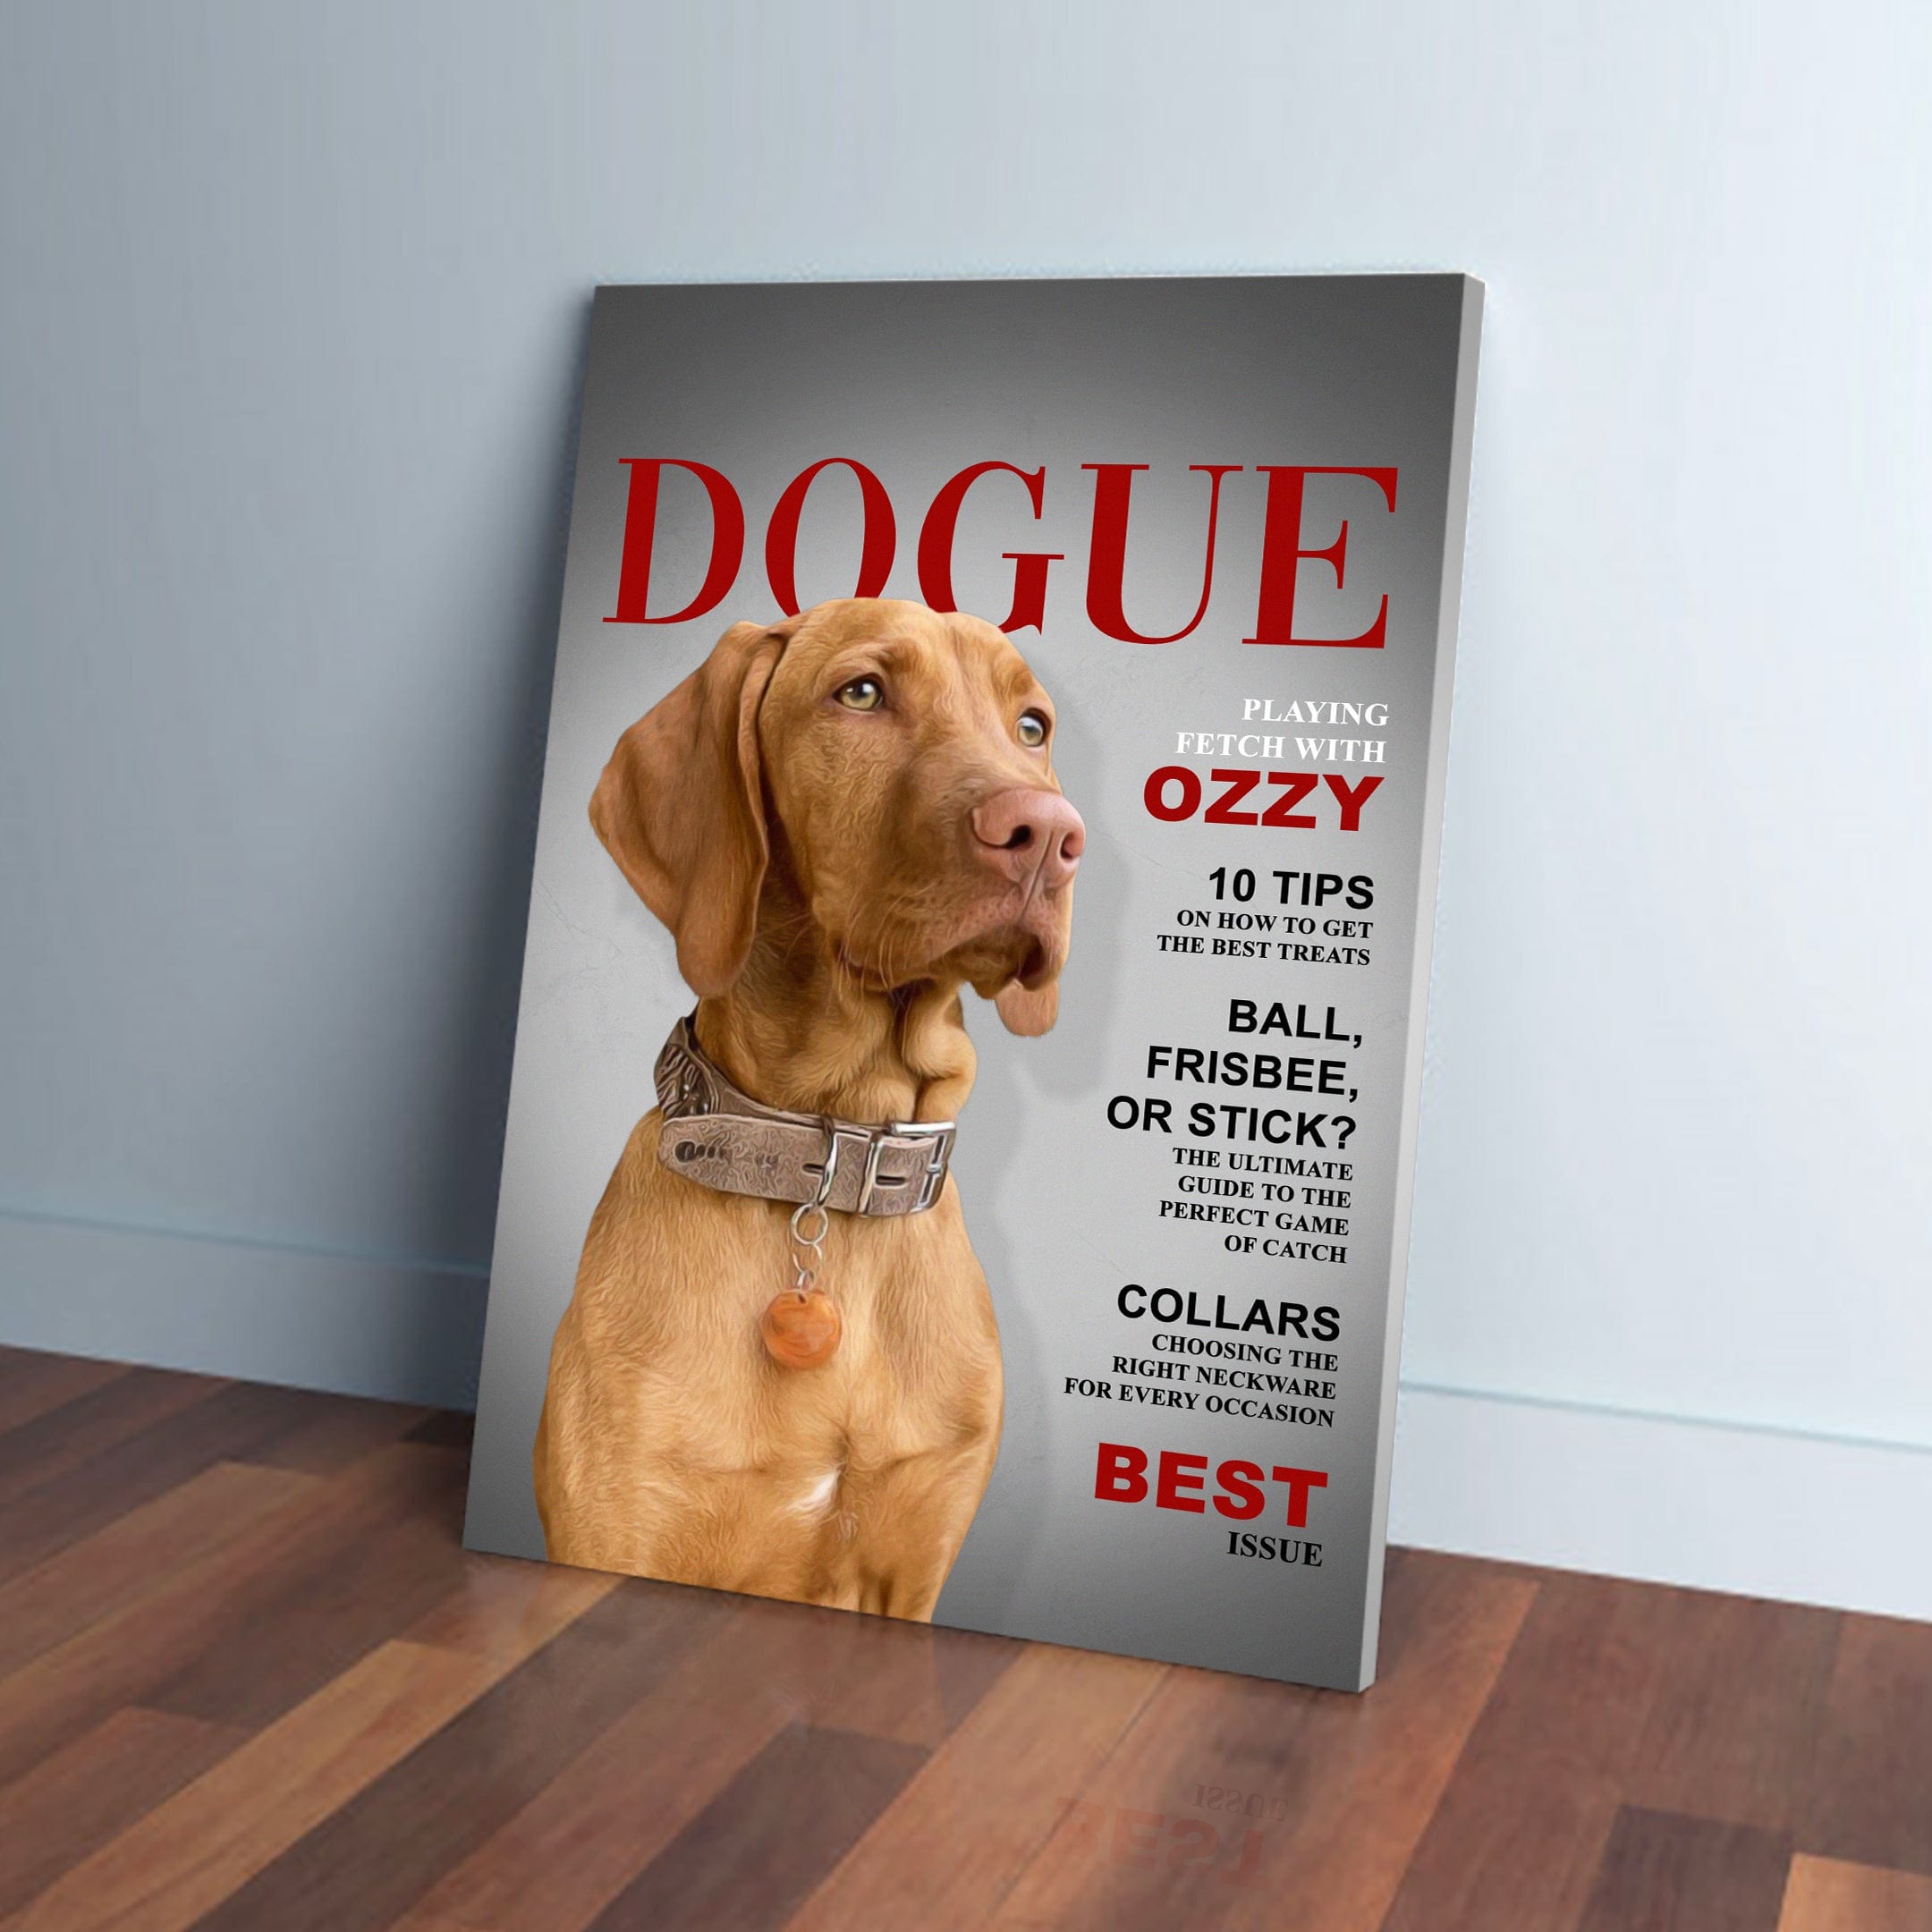 'Dogue' Personalized Pet Canvas